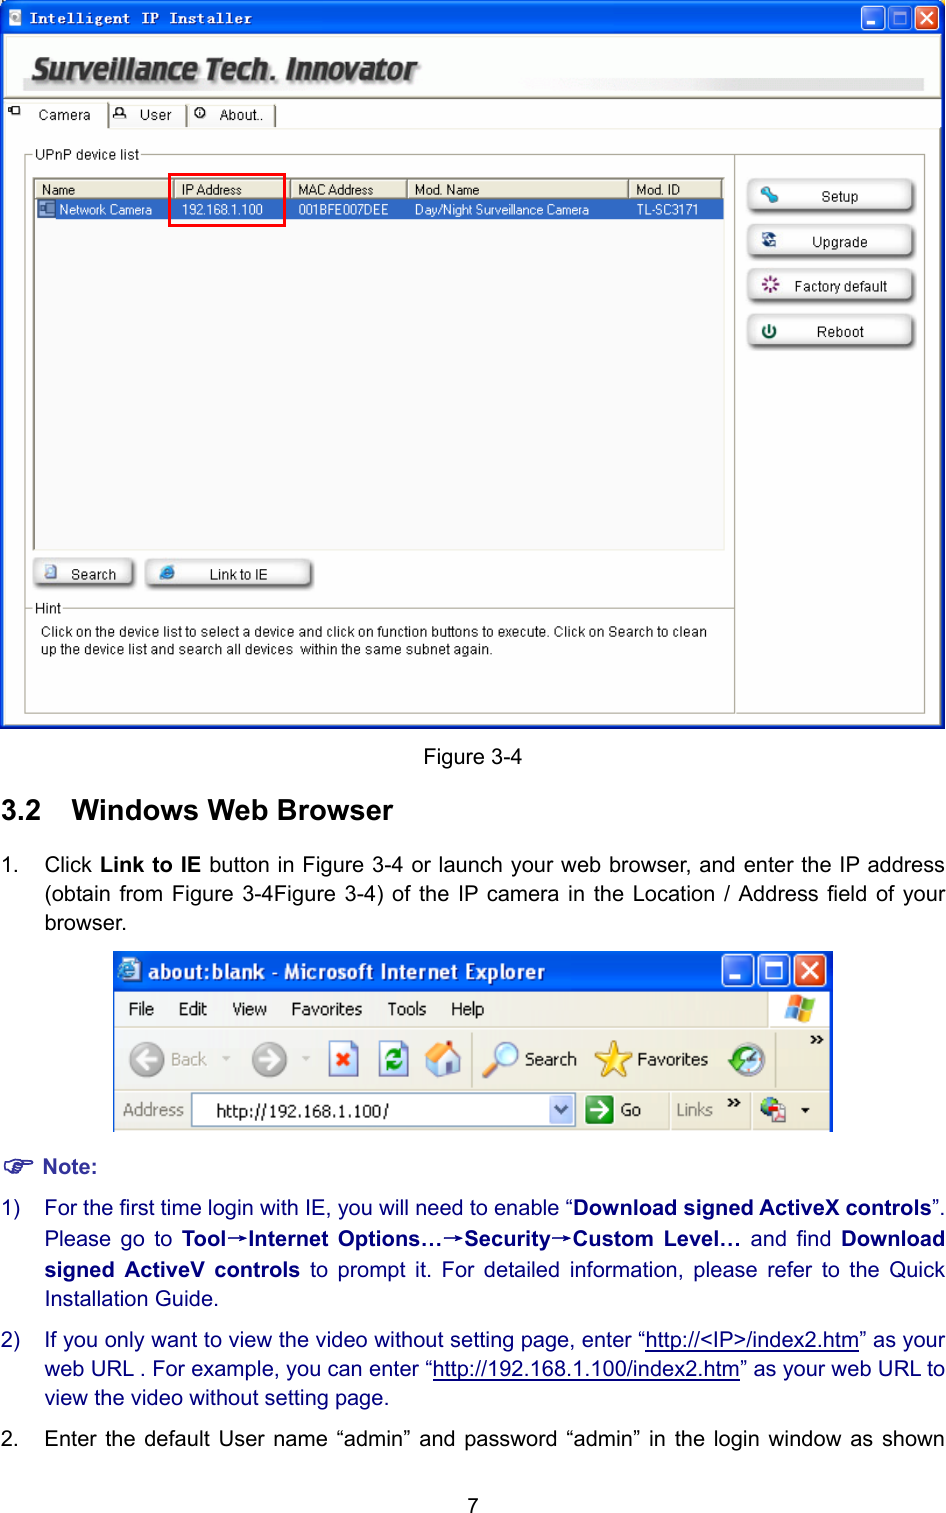 7  Figure 3-4 3.2  Windows Web Browser 1. Click Link to IE button in Figure 3-4 or launch your web browser, and enter the IP address (obtain from Figure 3-4Figure 3-4) of the IP camera in the Location / Address field of your browser.   ) Note: 1)  For the first time login with IE, you will need to enable “Download signed ActiveX controls”. Please go to Tool→Internet Options…→Security→Custom Level… and find Download signed ActiveV controls to prompt it. For detailed information, please refer to the Quick Installation Guide. 2)  If you only want to view the video without setting page, enter “http://&lt;IP&gt;/index2.htm” as your web URL . For example, you can enter “http://192.168.1.100/index2.htm” as your web URL to view the video without setting page. 2.  Enter the default User name “admin” and password “admin” in the login window as shown 